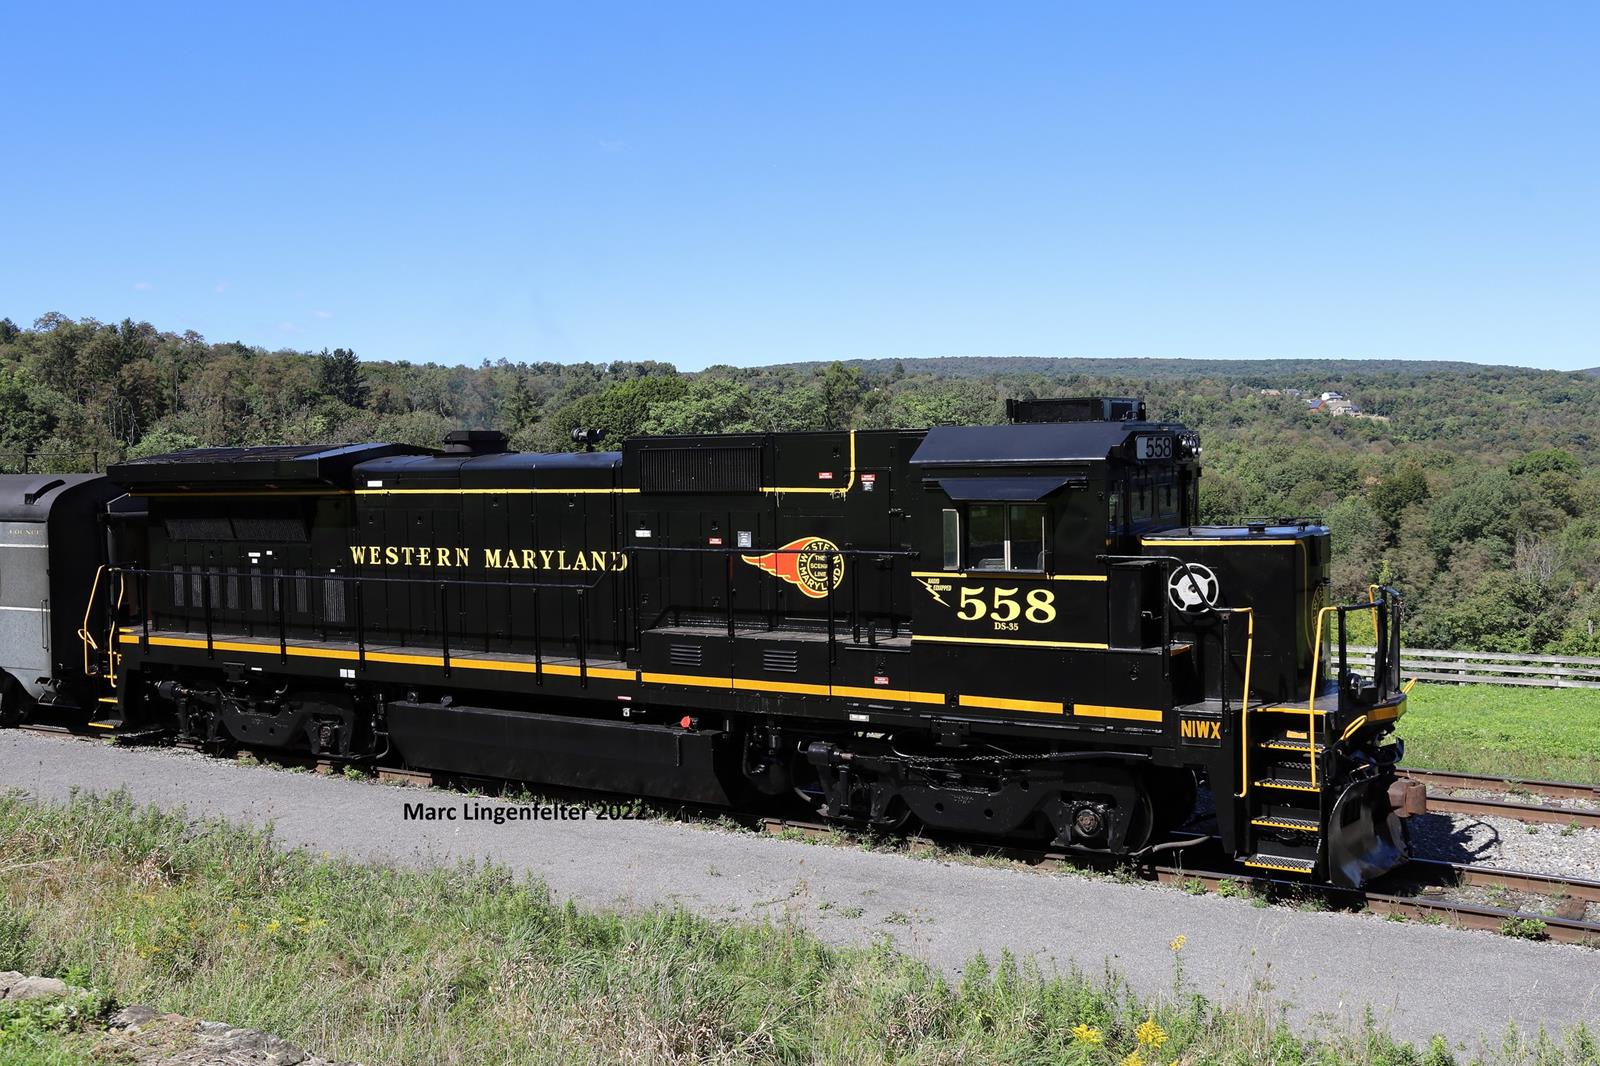 WMSR 558 is a class GE B32-8 (Dash 8-32B) and  is pictured in Frostburg, MD, USA.  This was taken along the WMSR Main Line on the Western Maryland Scenic Railroad. Photo Copyright: Marc Lingenfelter uploaded to Railroad Gallery on 11/18/2022. This photograph of WMSR 558 was taken on Friday, September 23, 2022. All Rights Reserved. 